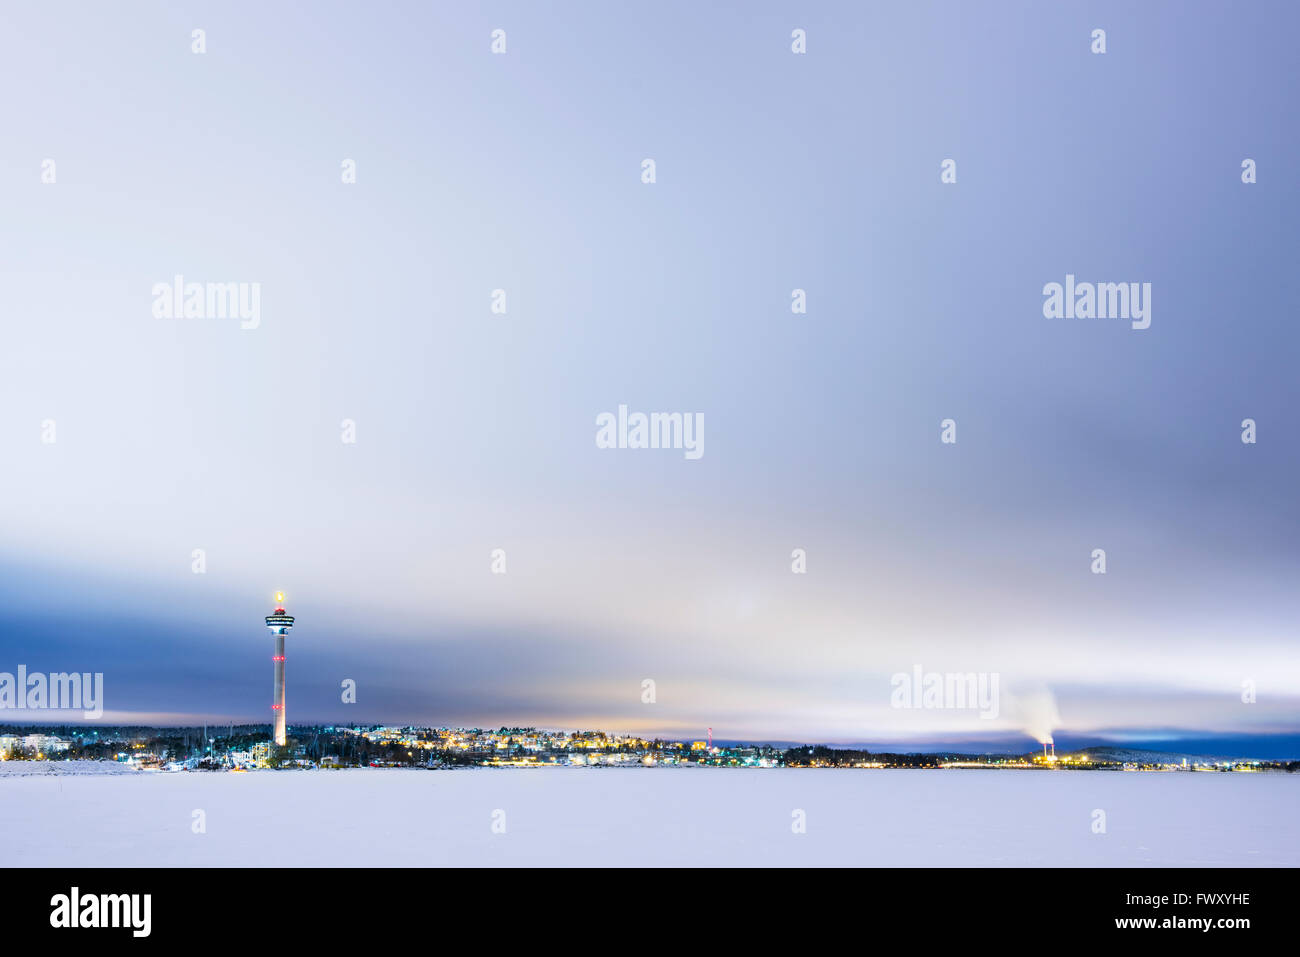 Finland, Pirkanmaa, Tampere, Winter scene with city and communication tower in background Stock Photo